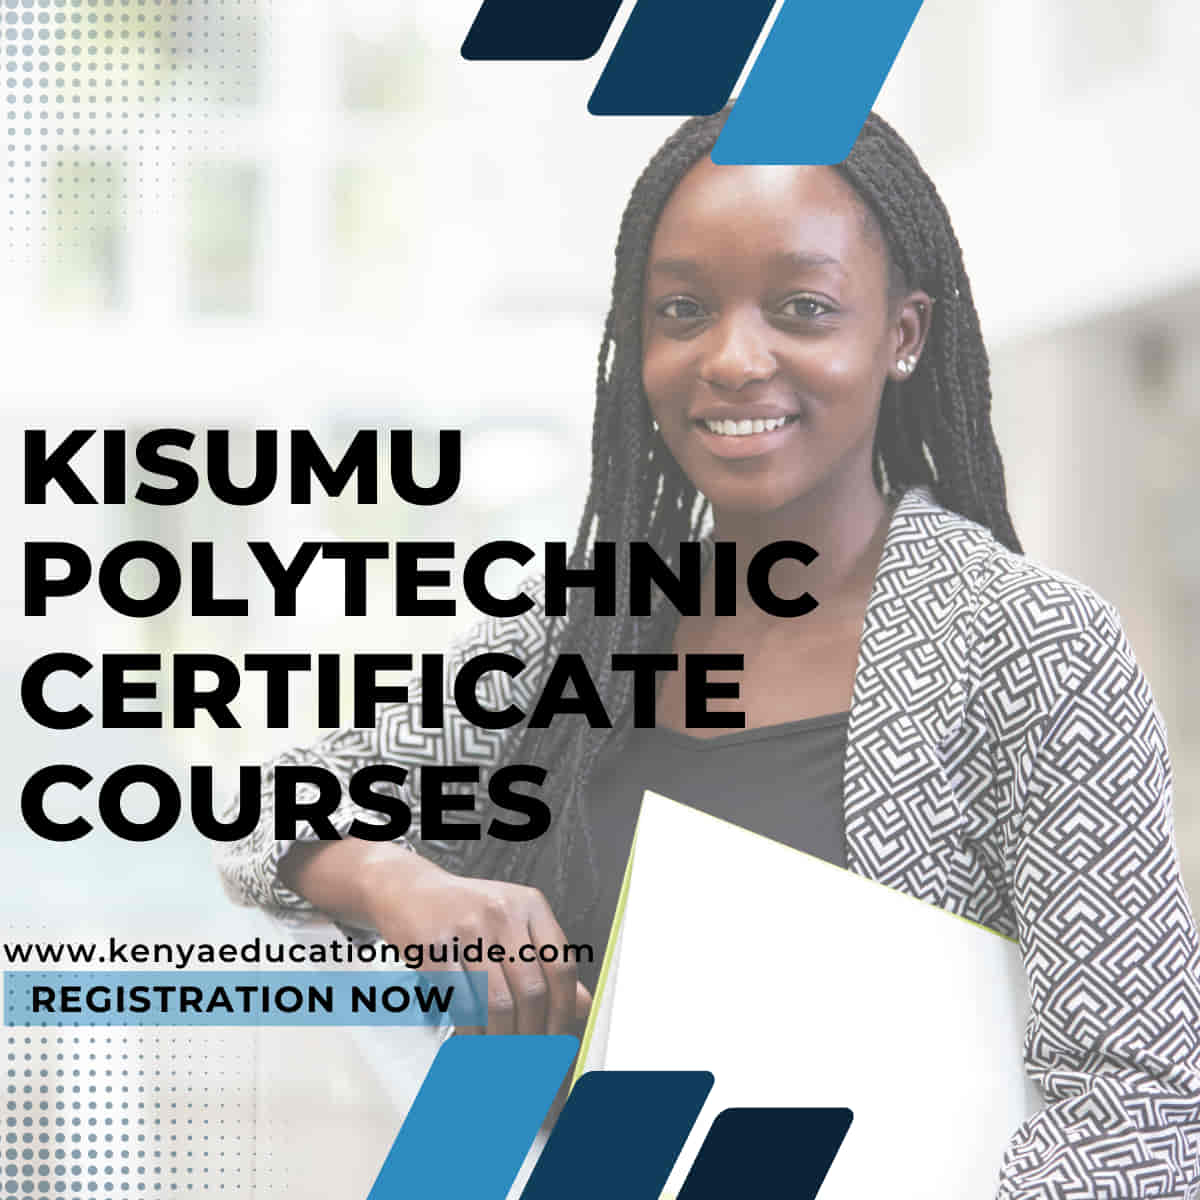 Certificate courses offered at Kisumu polytechnic